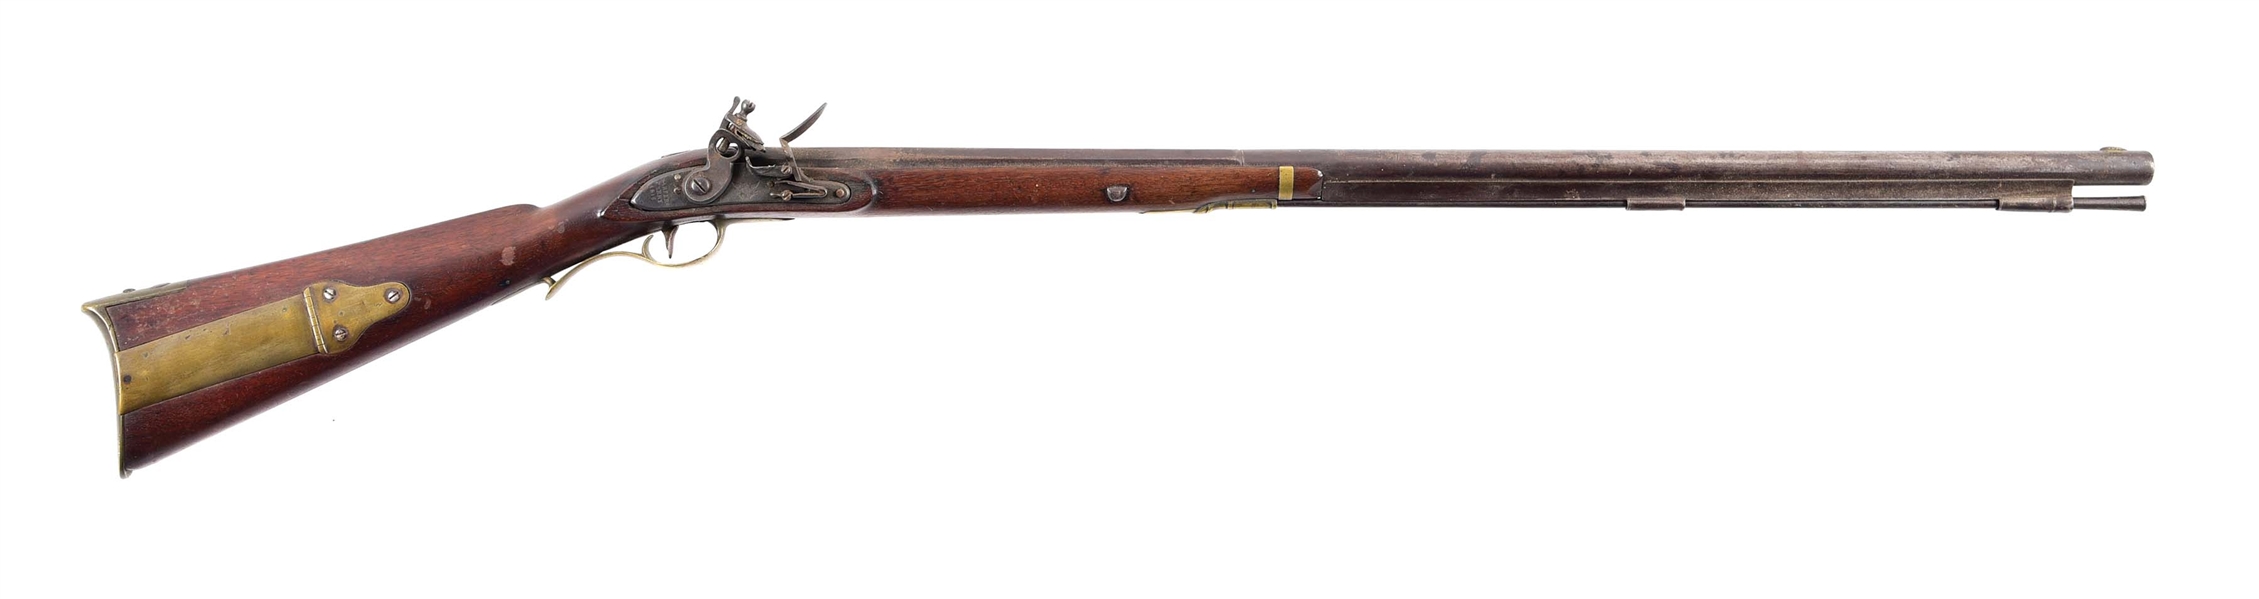 (A) U.S. MODEL 1803 HARPERS FERRY RIFLE DATED 1816.